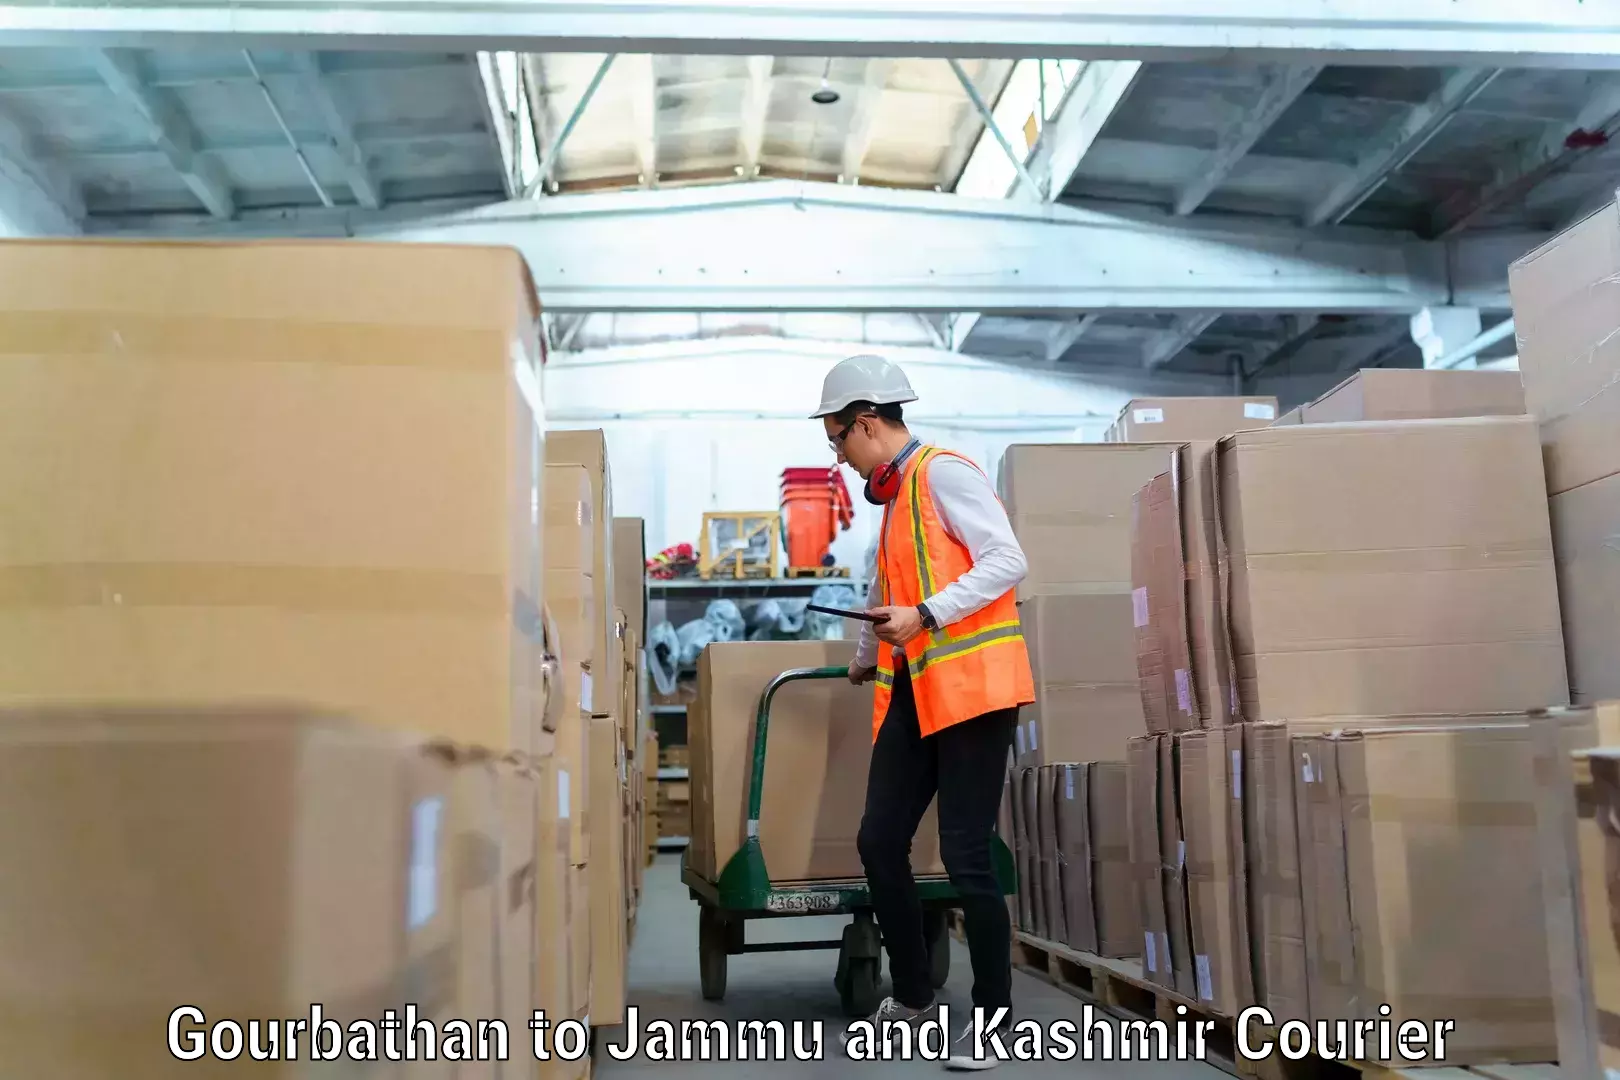 Furniture transport specialists Gourbathan to Jammu and Kashmir